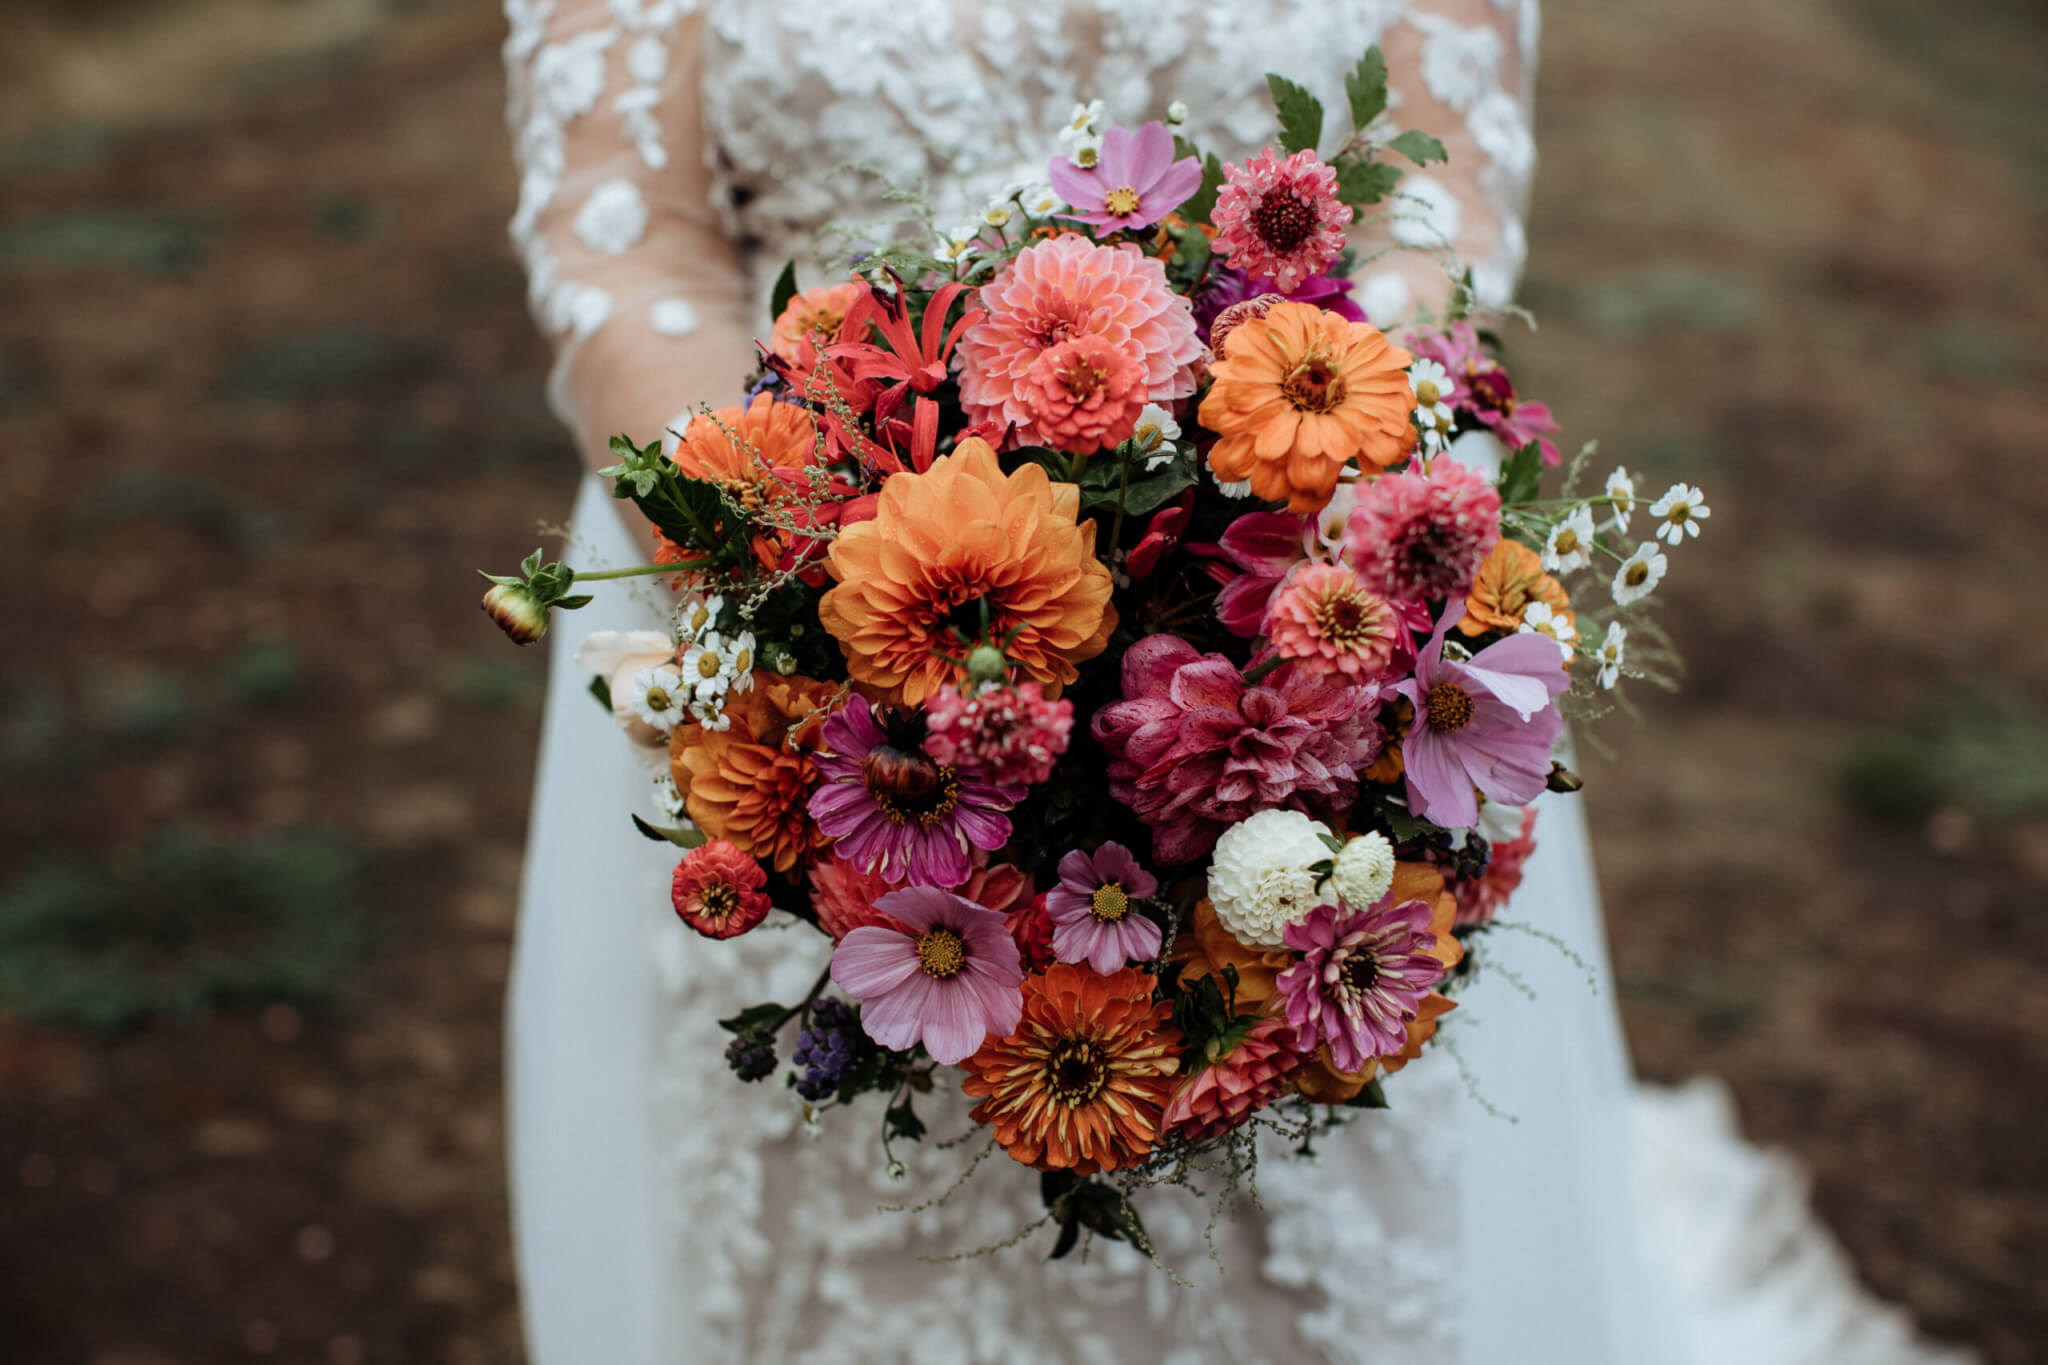 Sustainability is very cool when it comes to wedding flowers